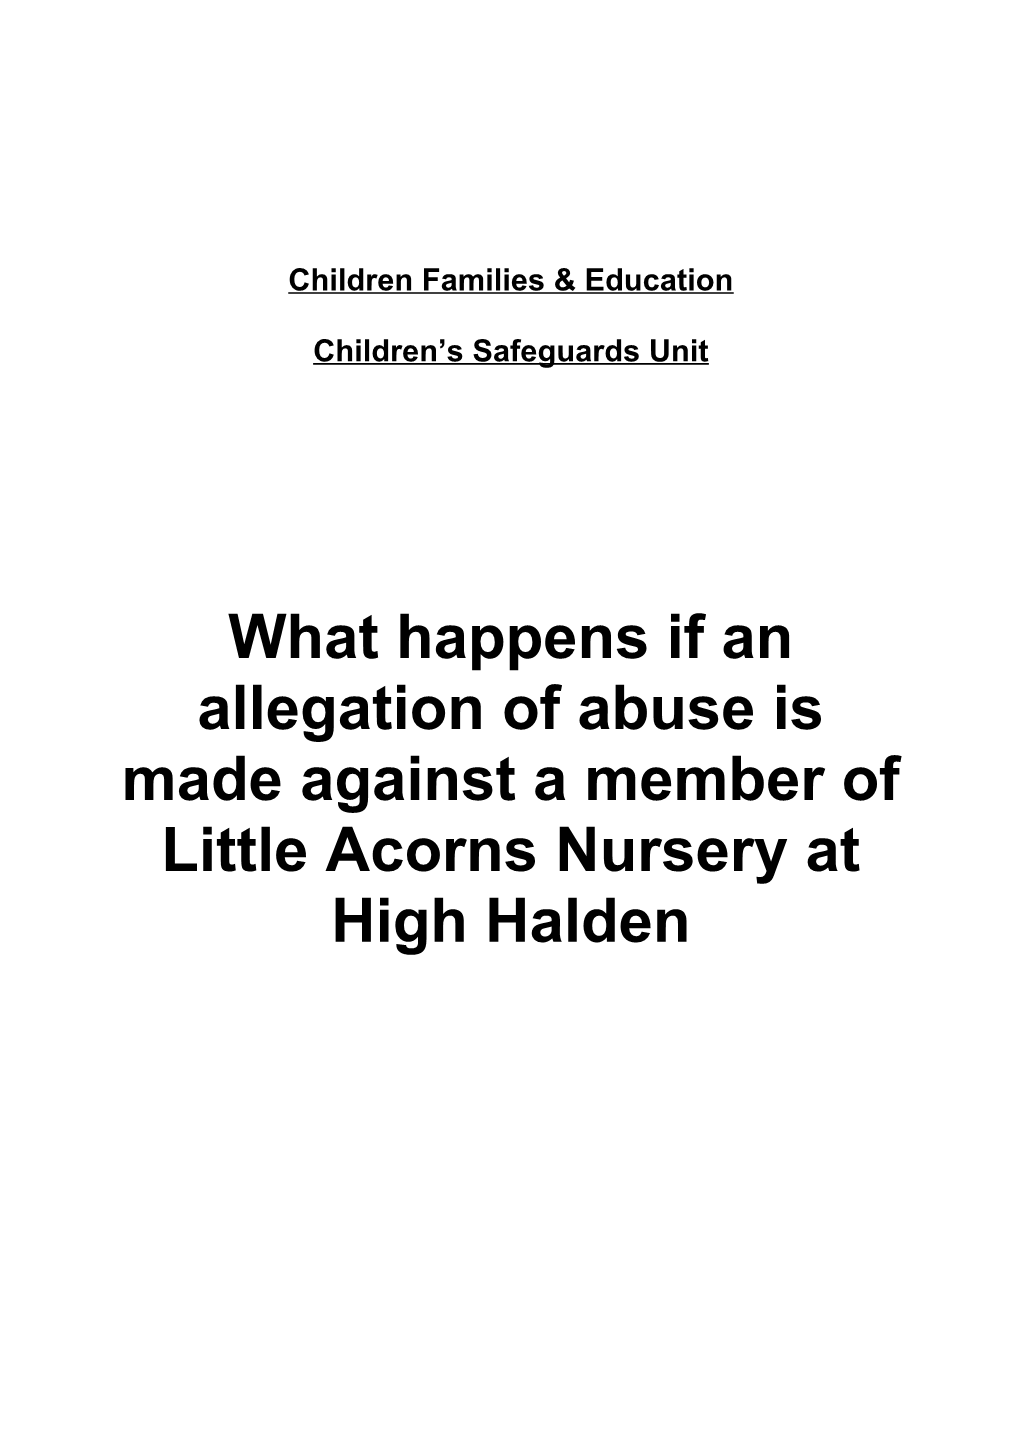 Policy For: What Happens If an Allegation of Abuse Is Made Against a Member of (Name of Setting)